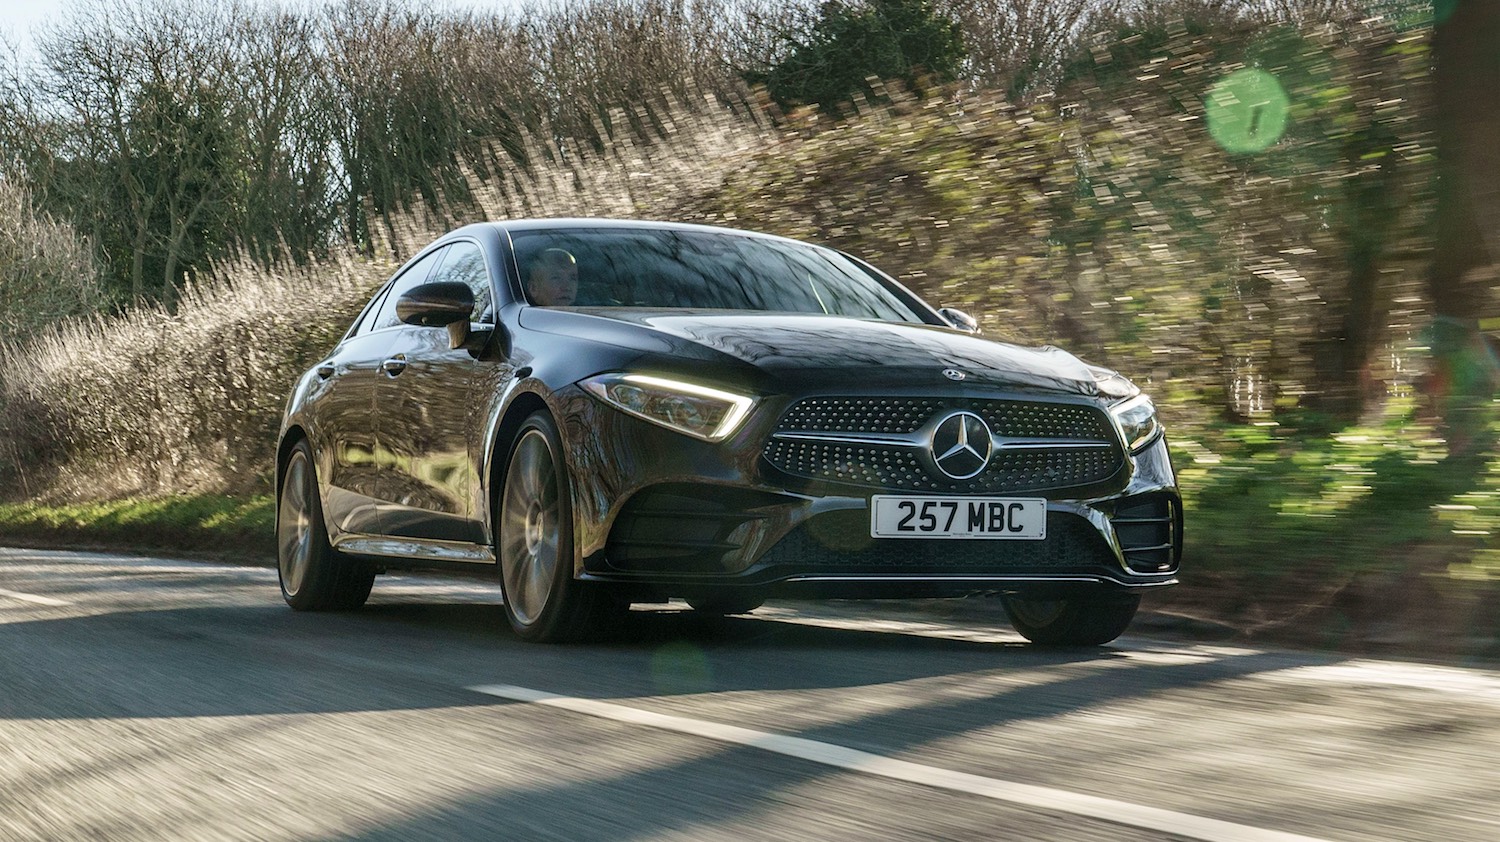 Paul Beard reviews the Mercedes Benz CLS 450 AMG Line for Drive 21